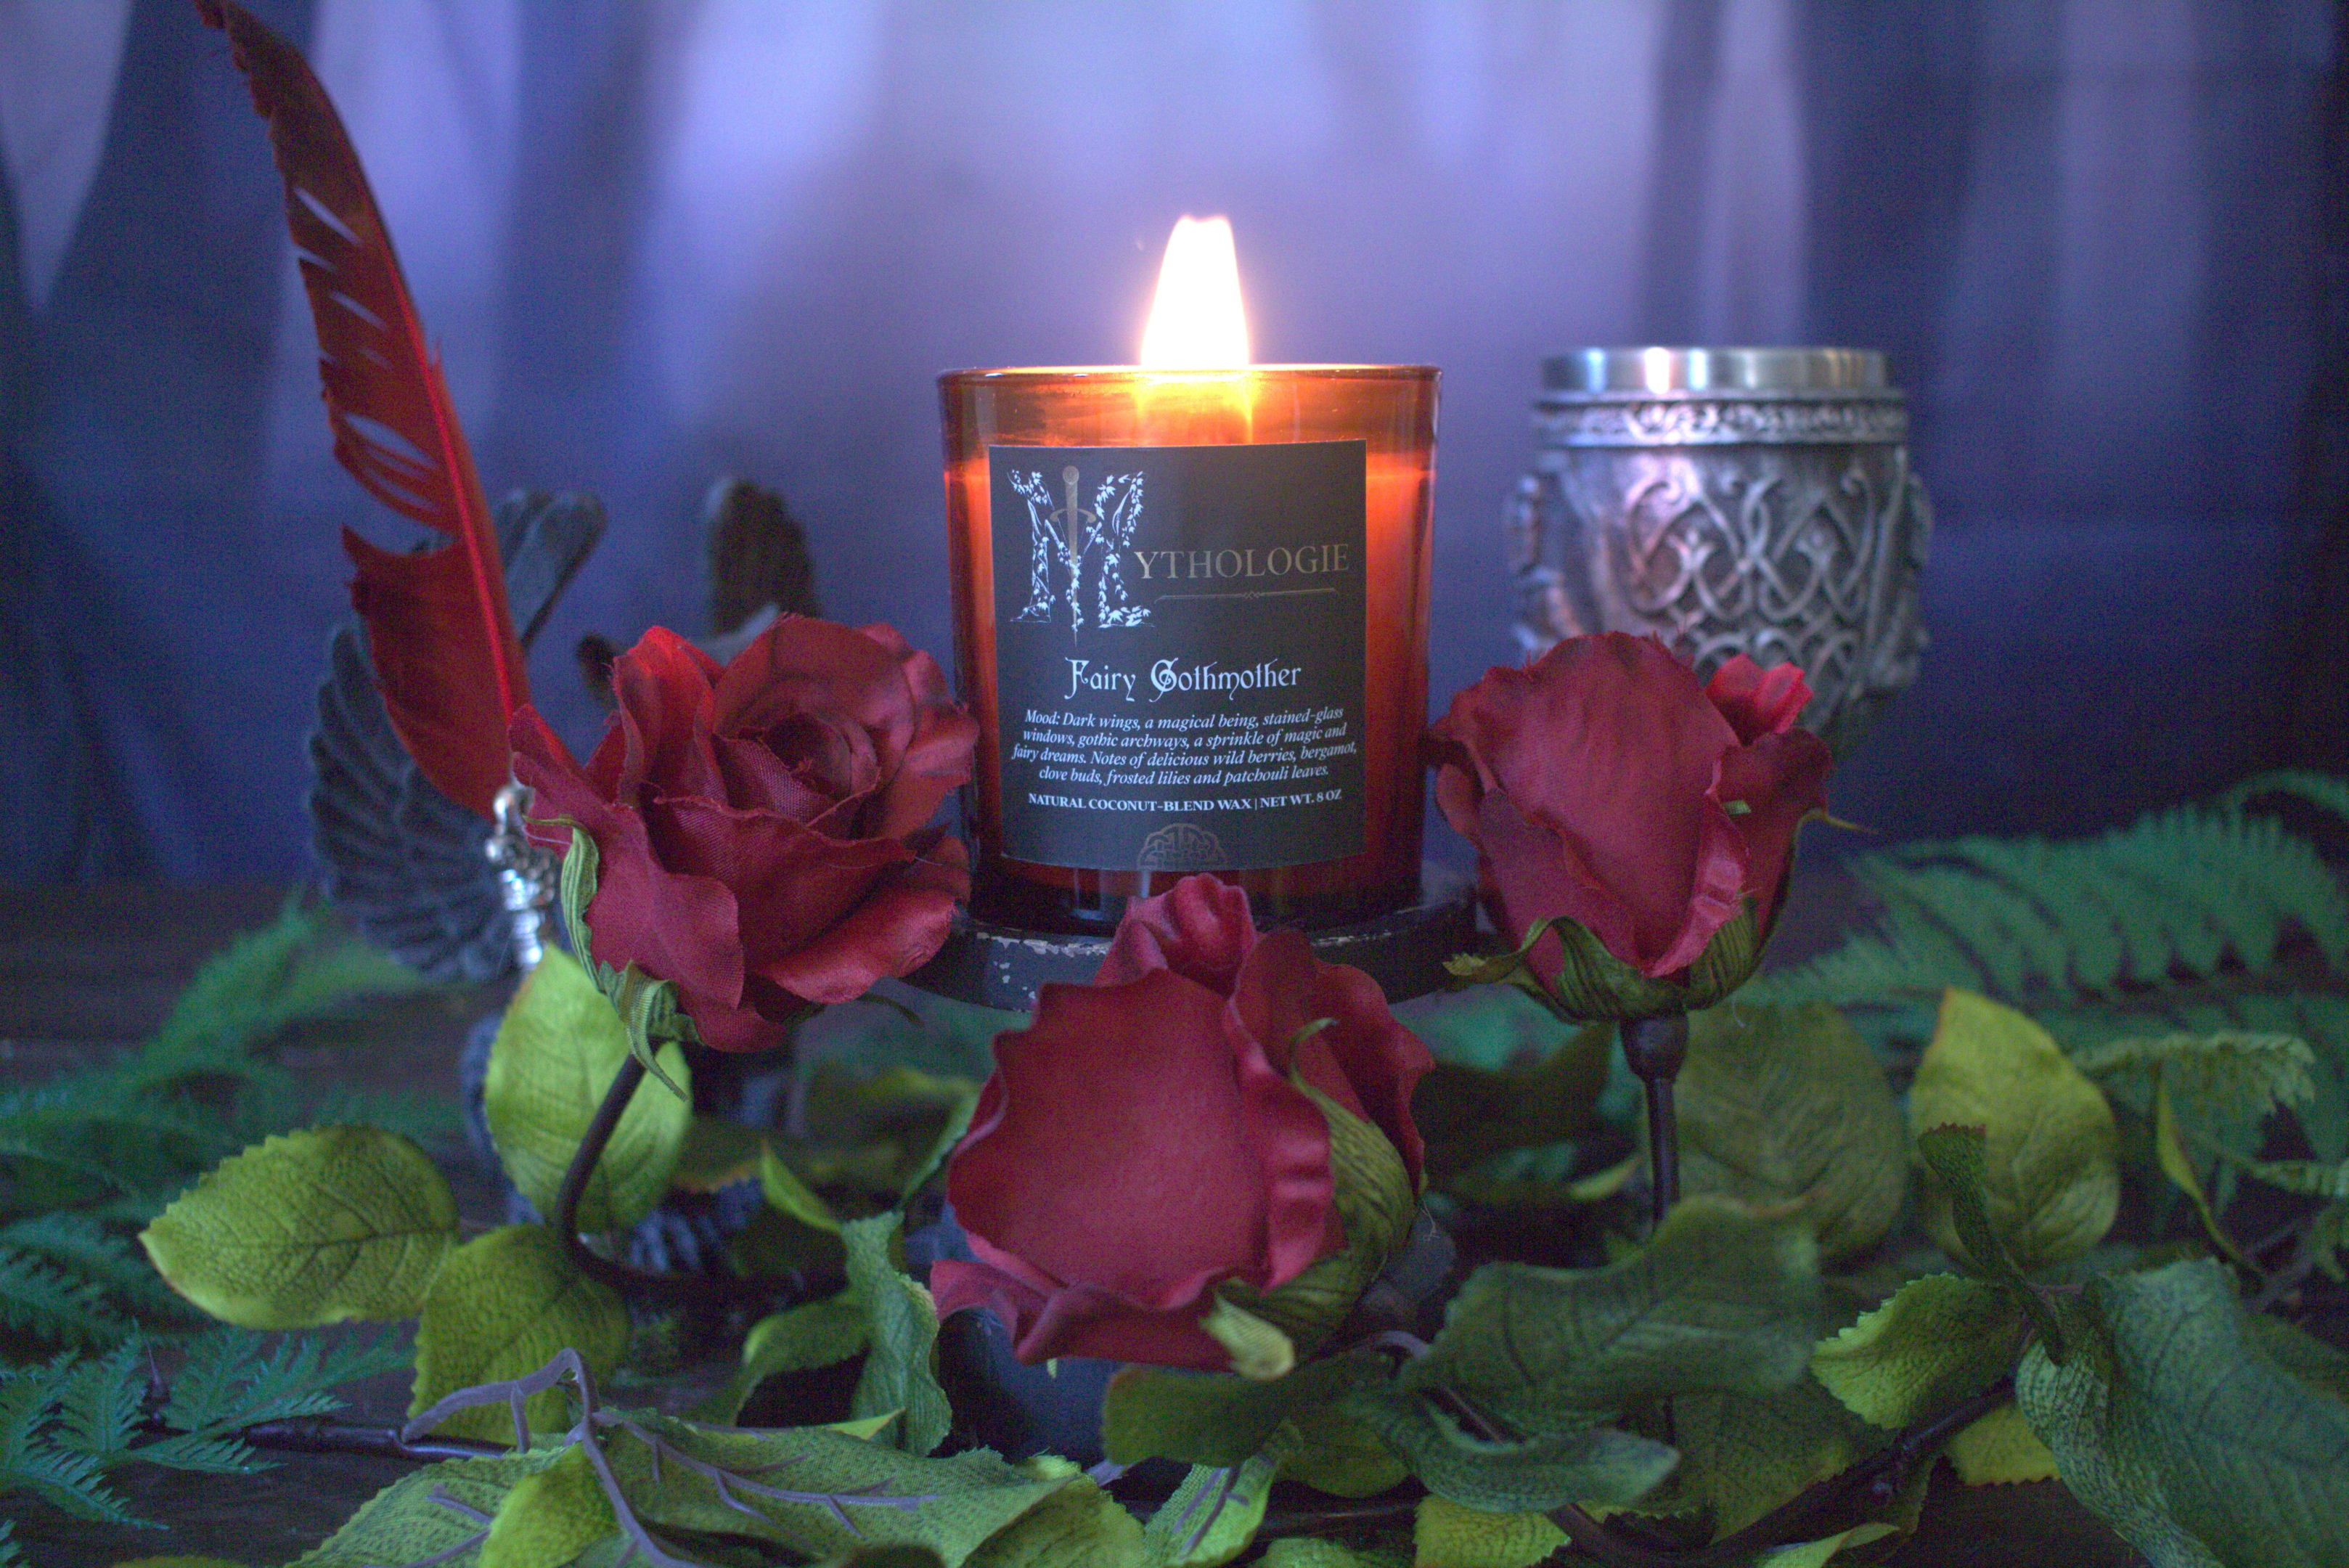 Delicious wild berries, bergamot, clove buds, frosted lilies, and patchouli leaves.